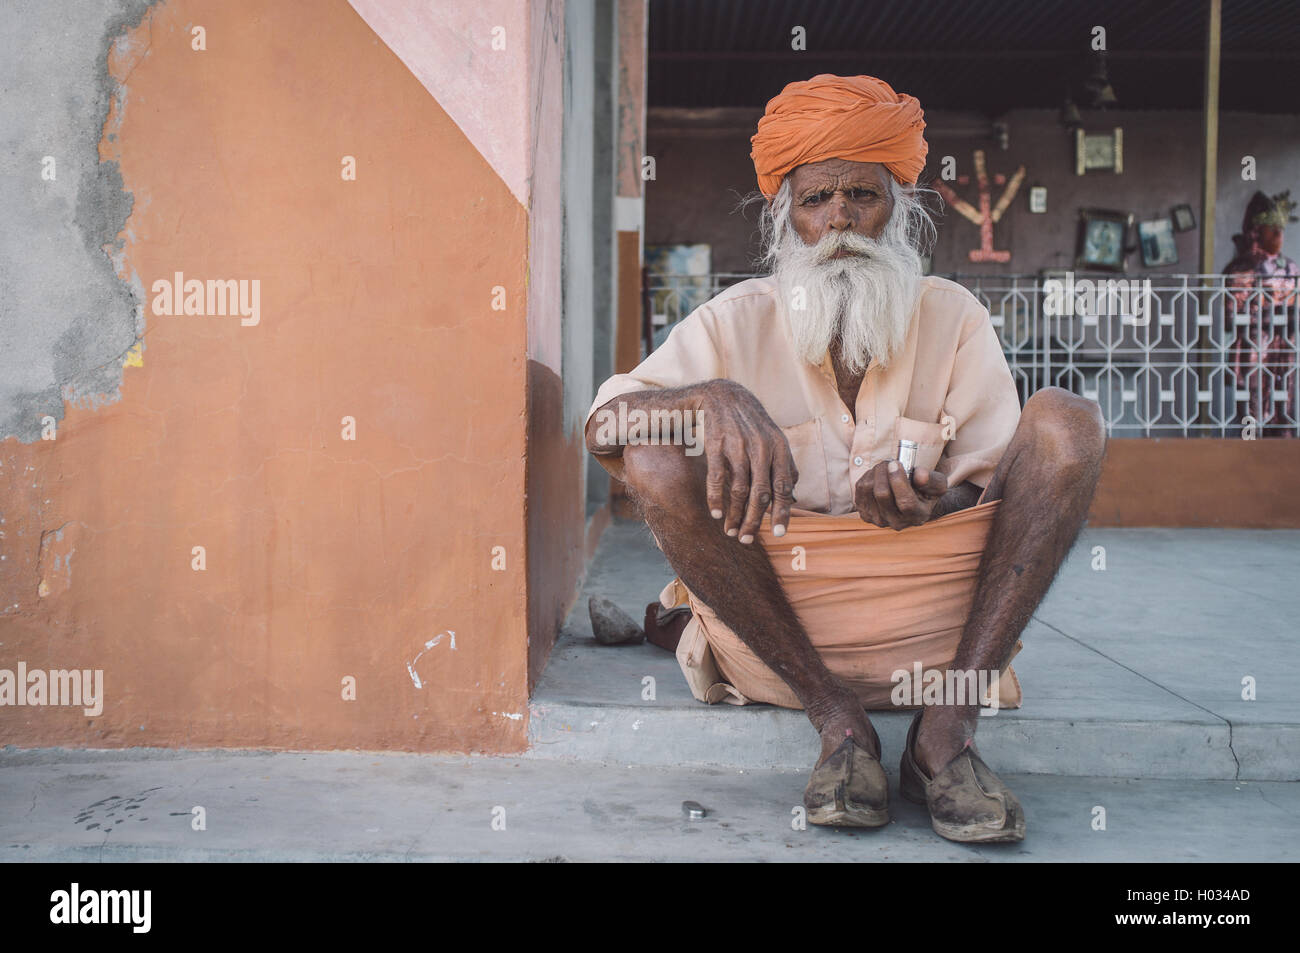 GODWAR, INDIA - 12 FEBRUARY 2015: Elderly Indian tribesman with turban in lungi sits on ground in front of temple. Post-processe Stock Photo